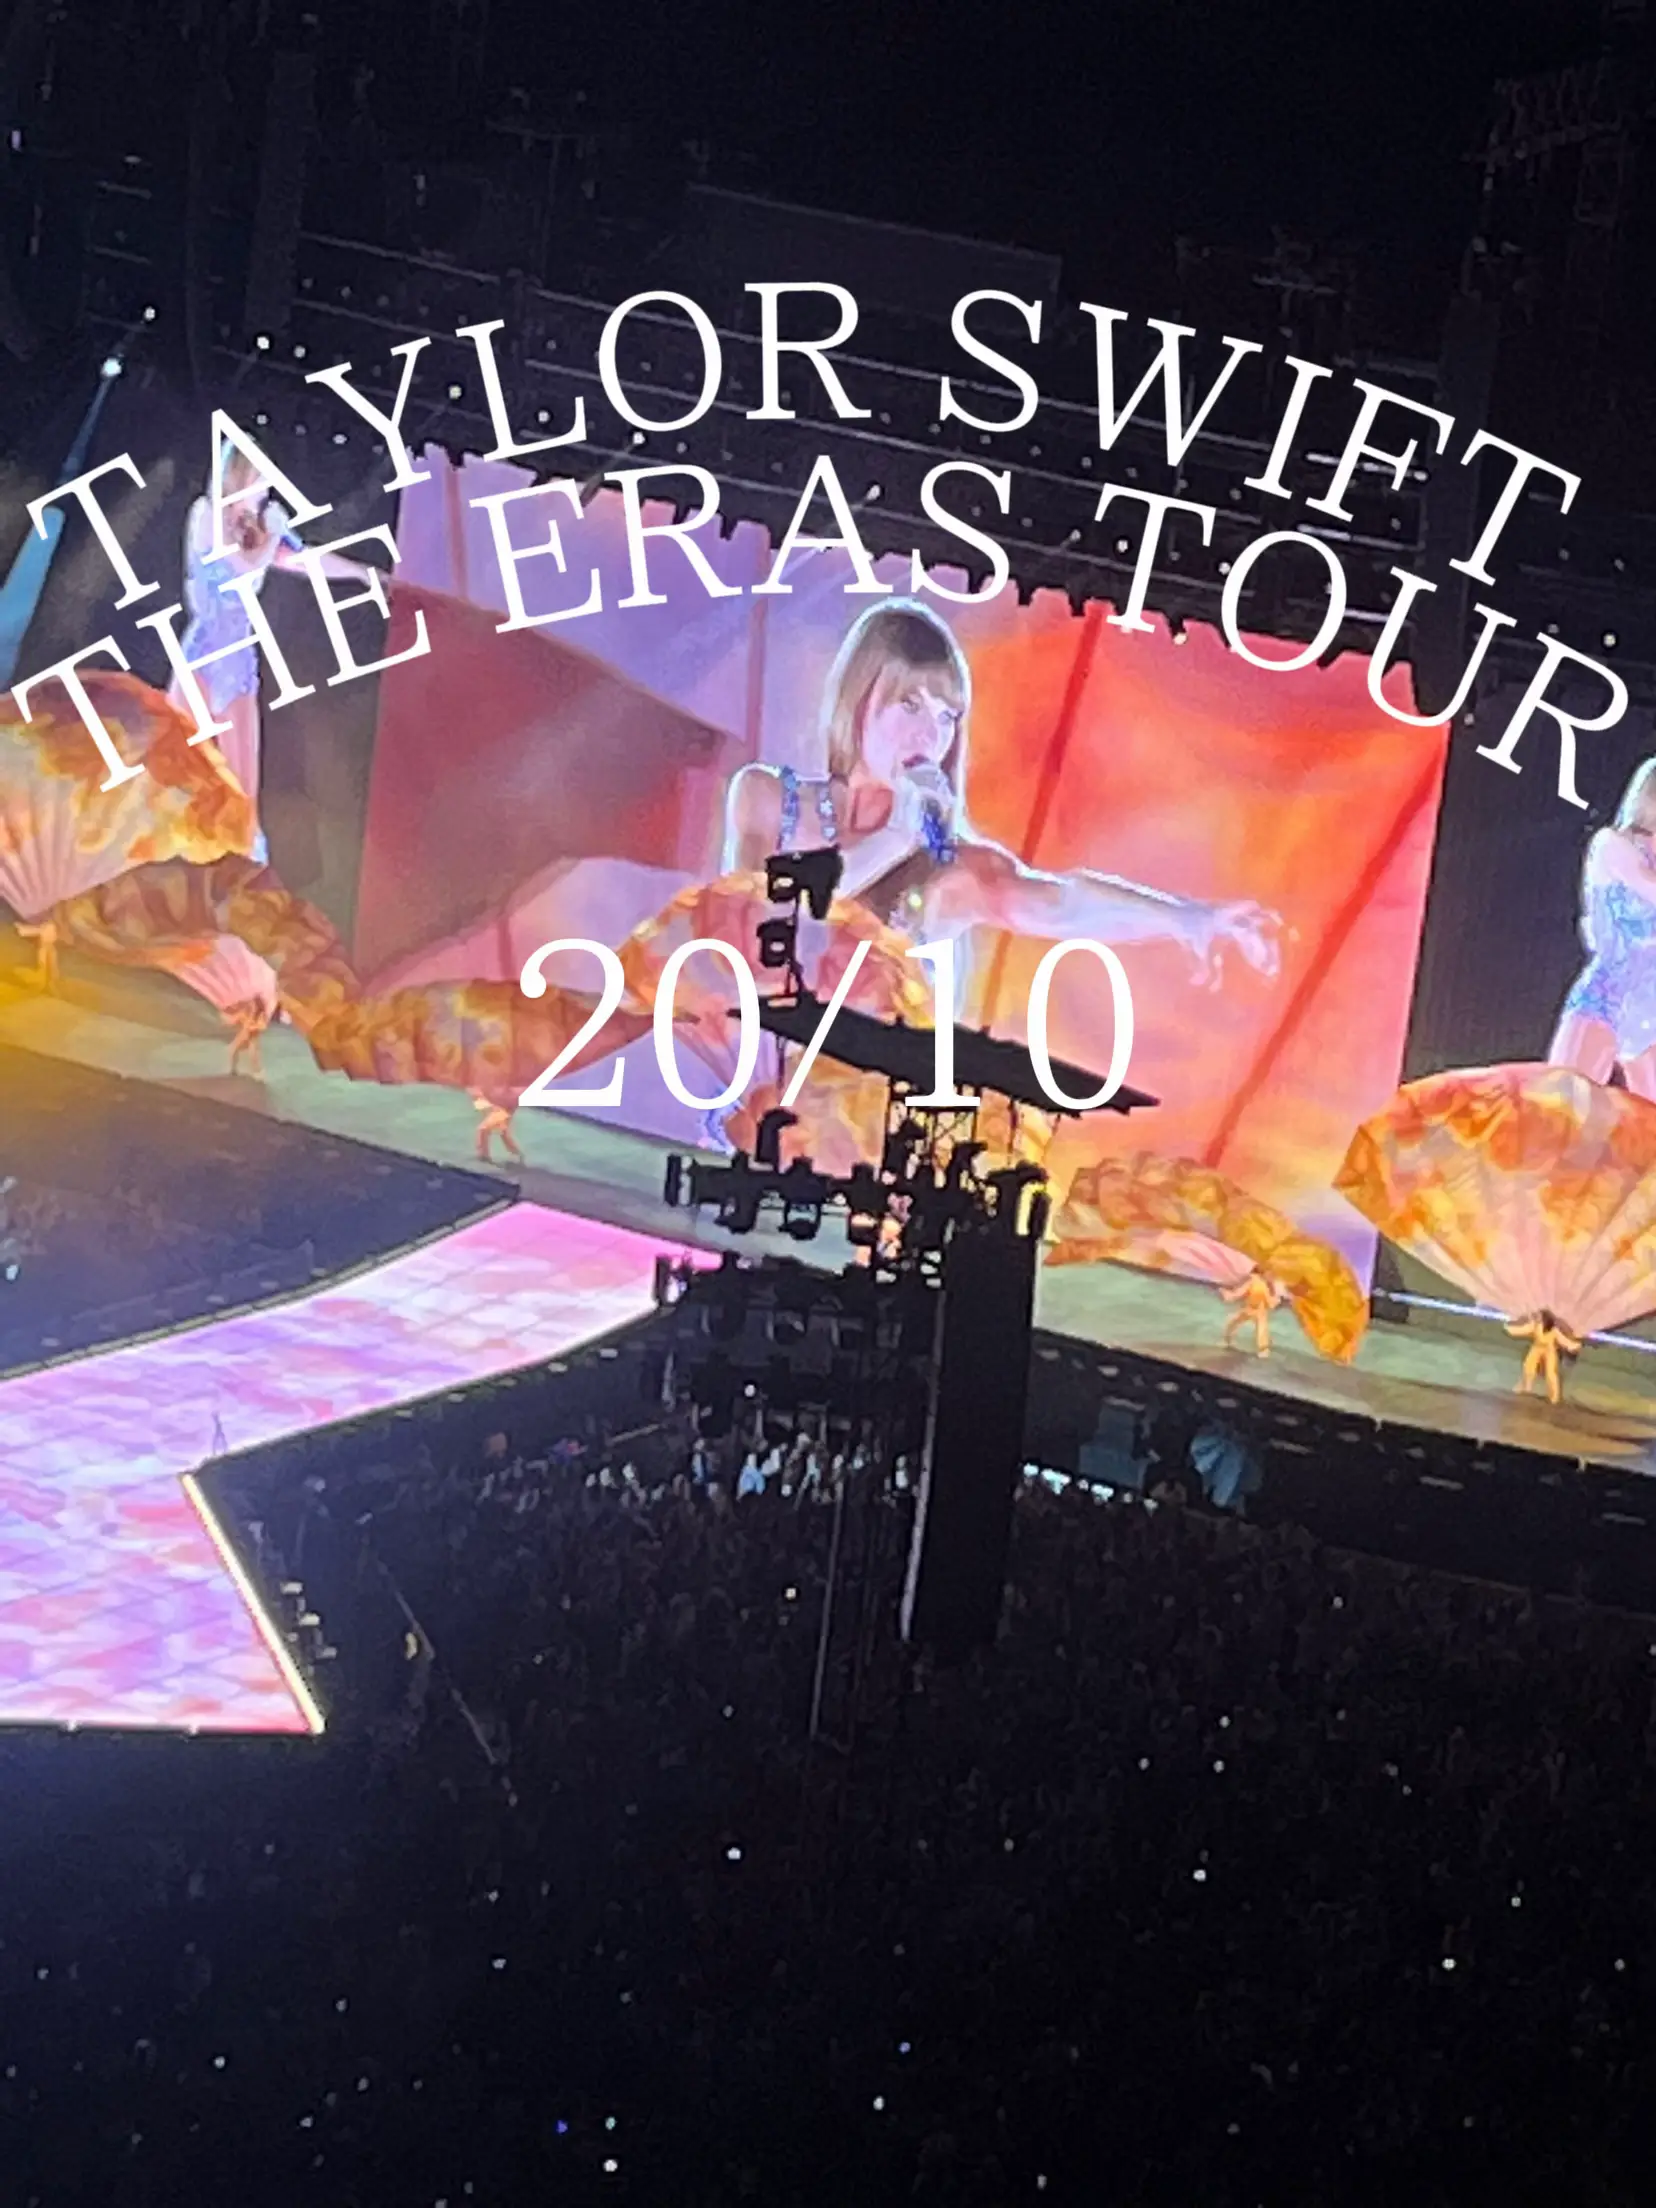  Taylor Swift is performing at a concert in 2010.